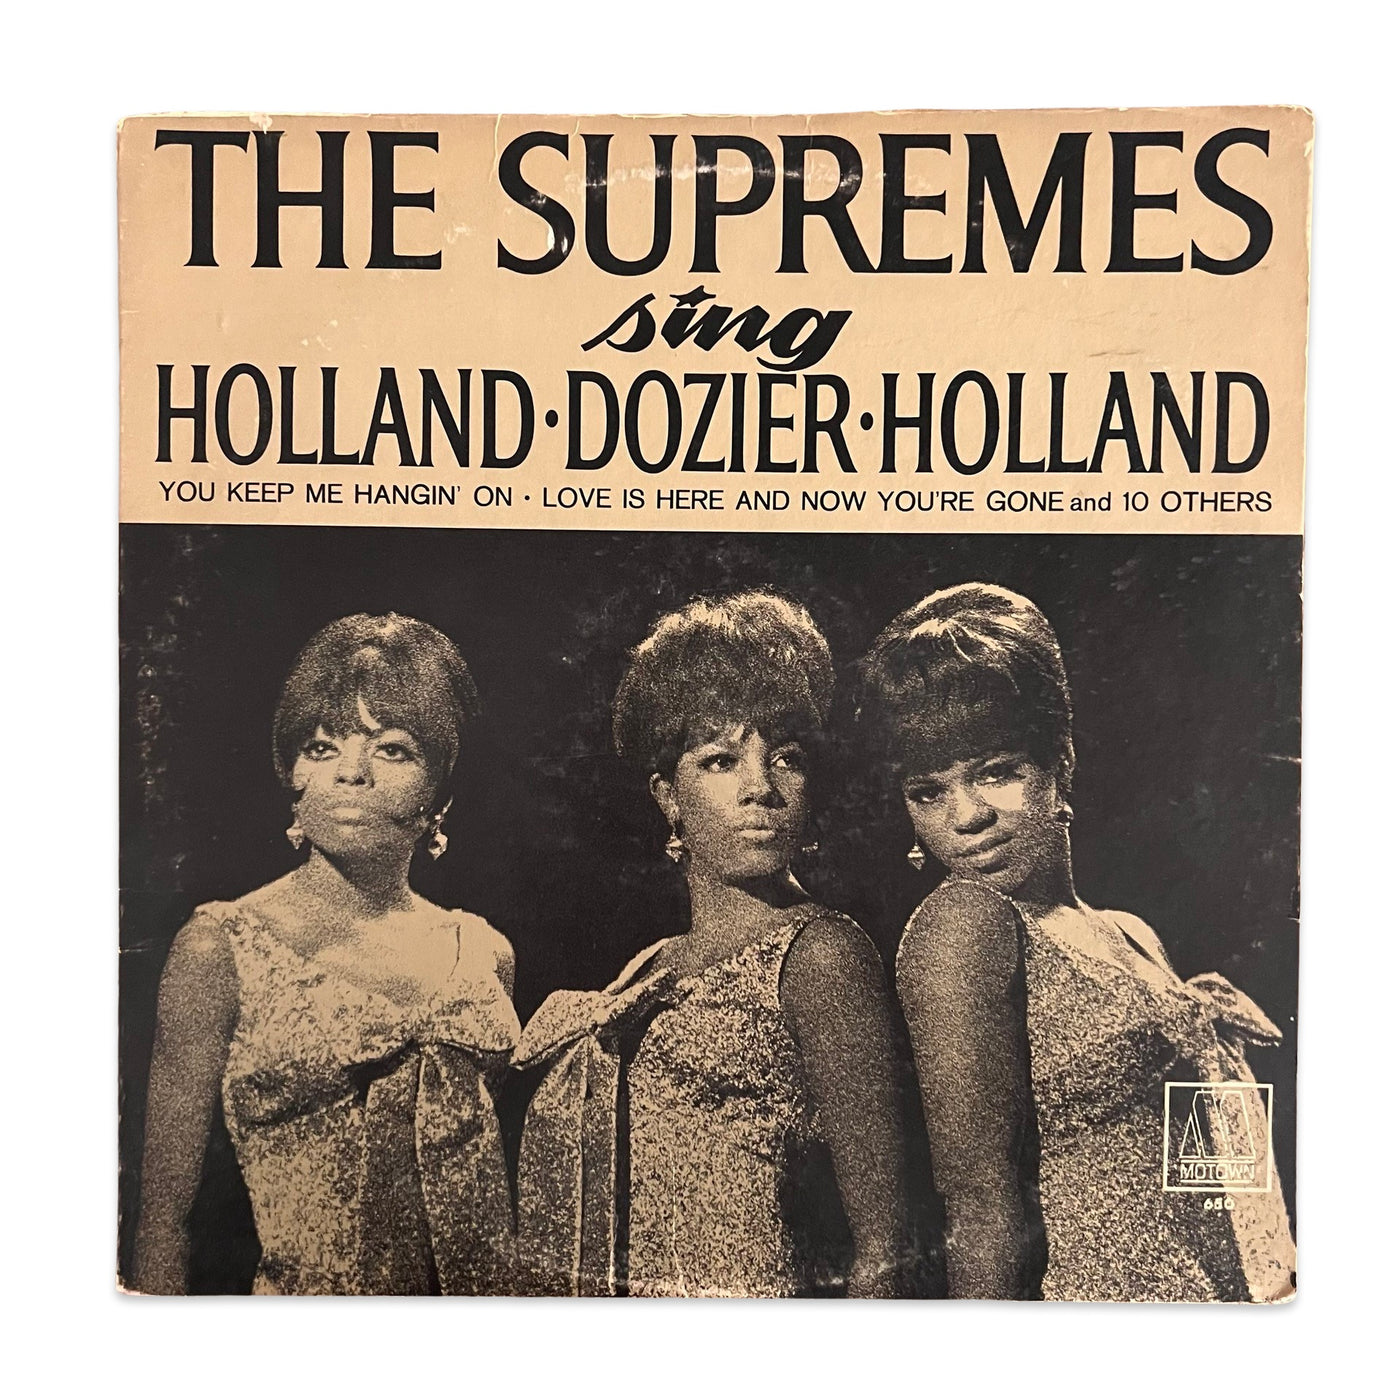 The Supremes - Supremes Sing Holland - Dozier - Holland